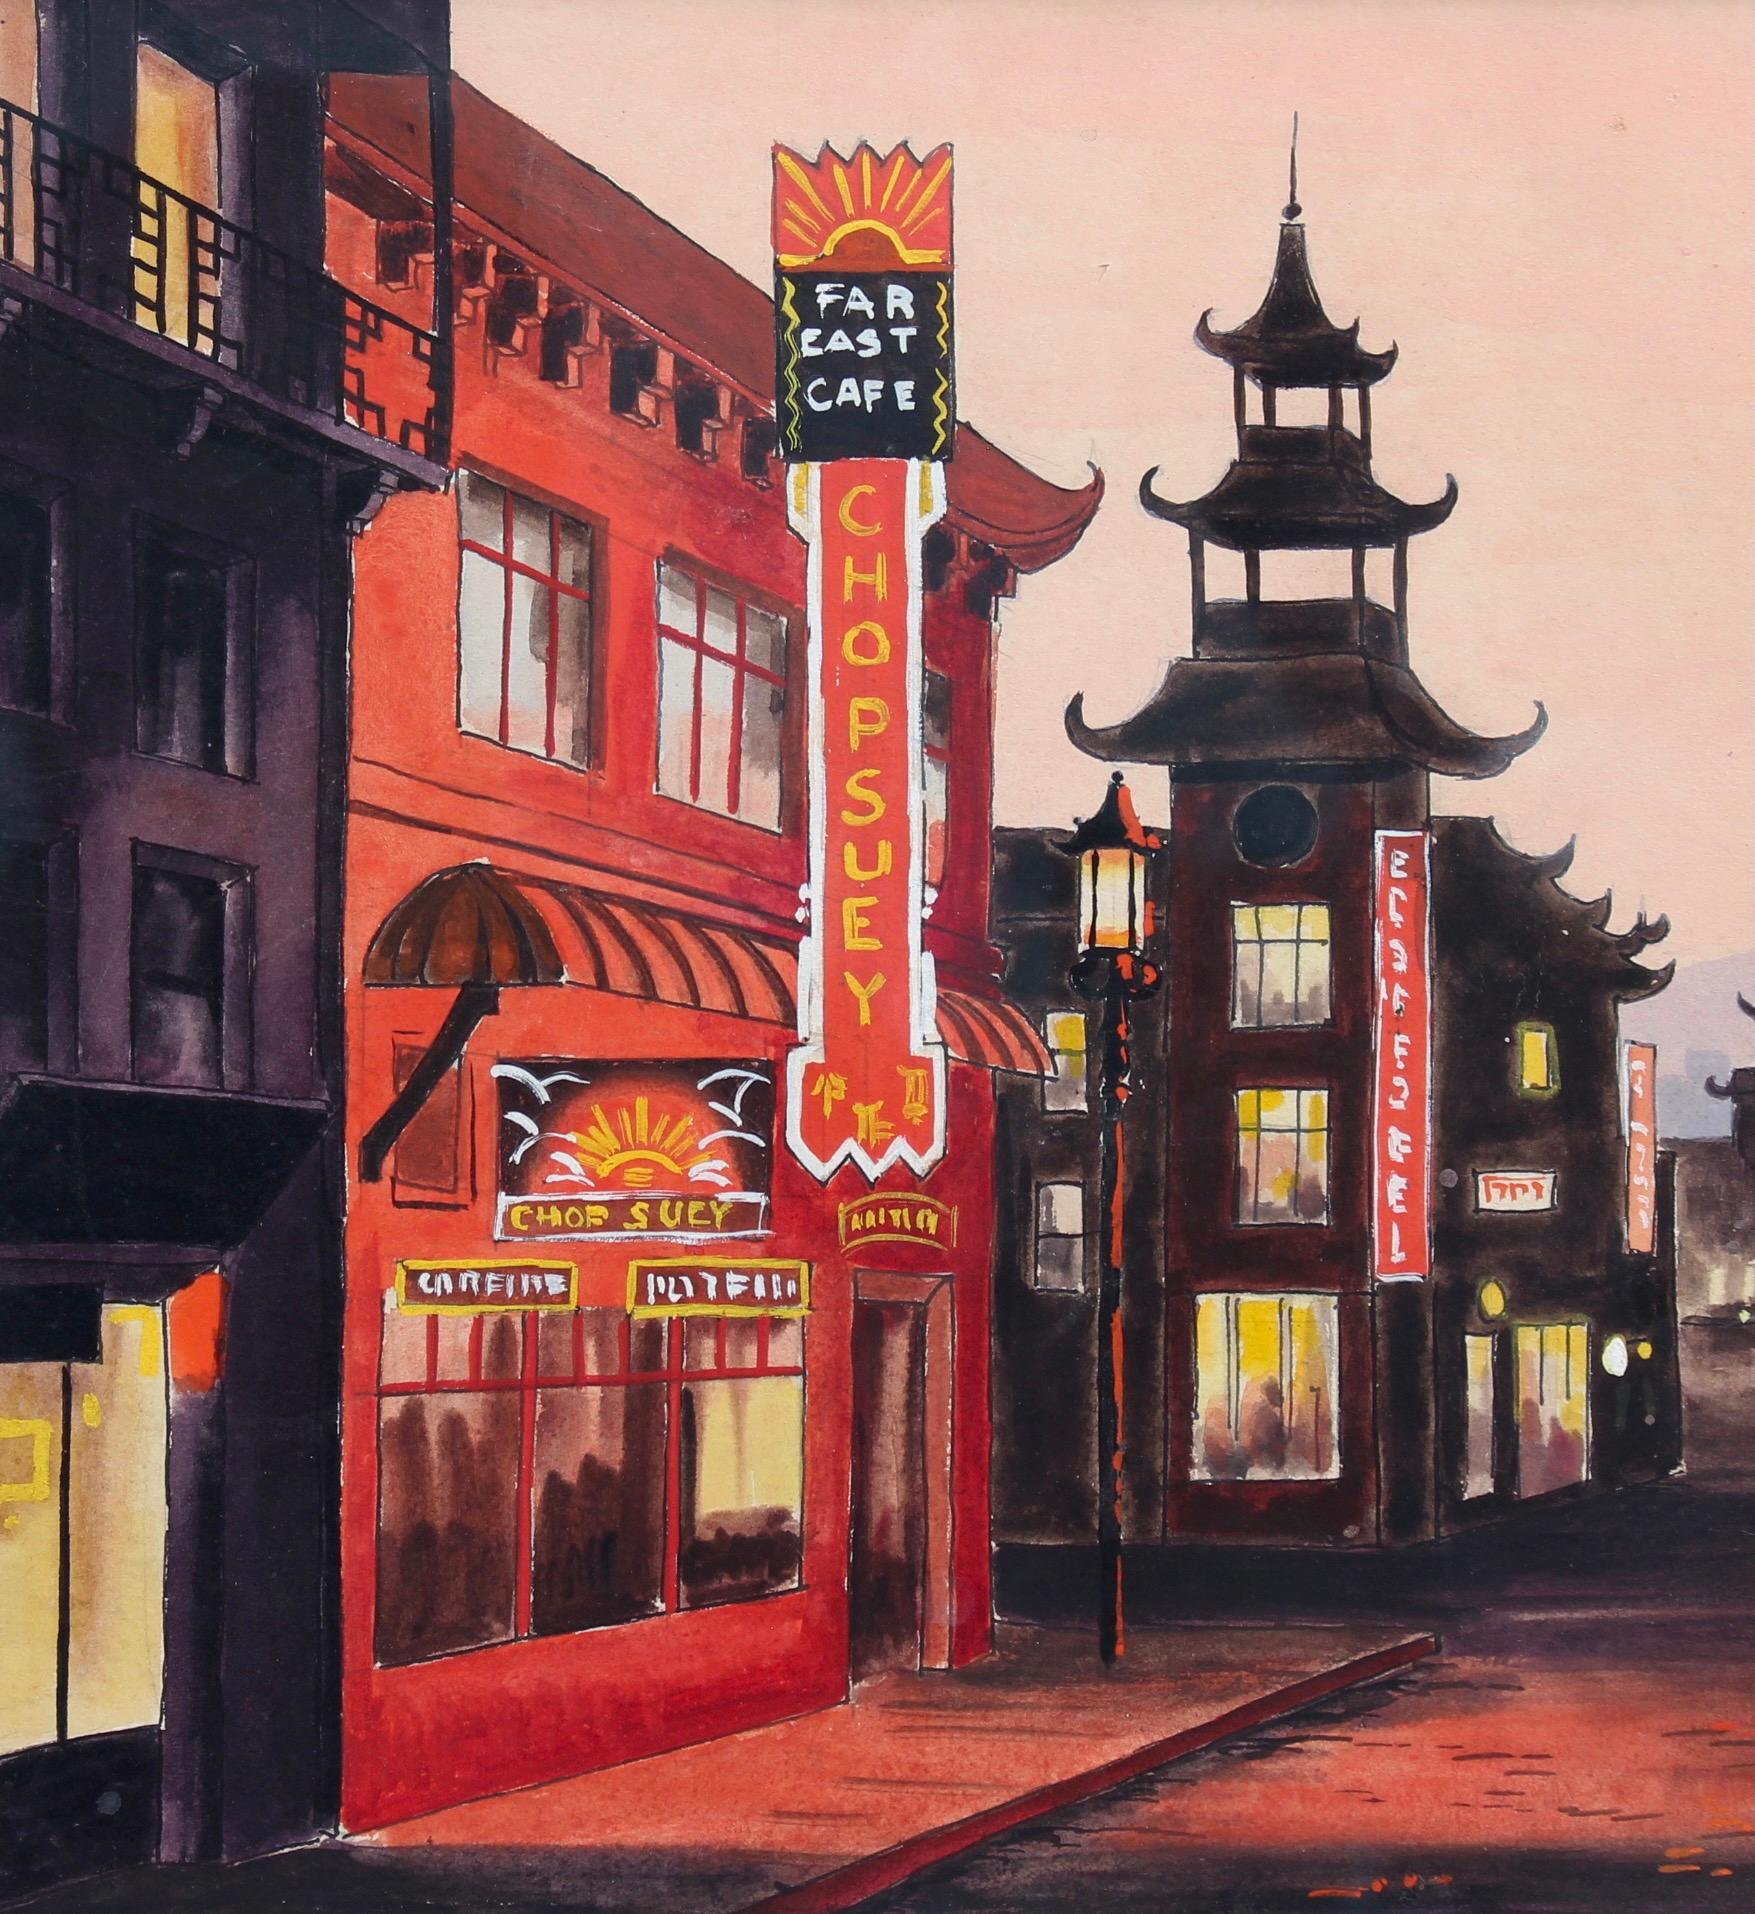 'Chinatown San Francisco at Twilight', ink and gouache, diptych on card stock, French School (circa 1950s). This artwork was discovered in Paris, France. The unnamed artist skilfully captured that magical moment at dusk when light is at its most